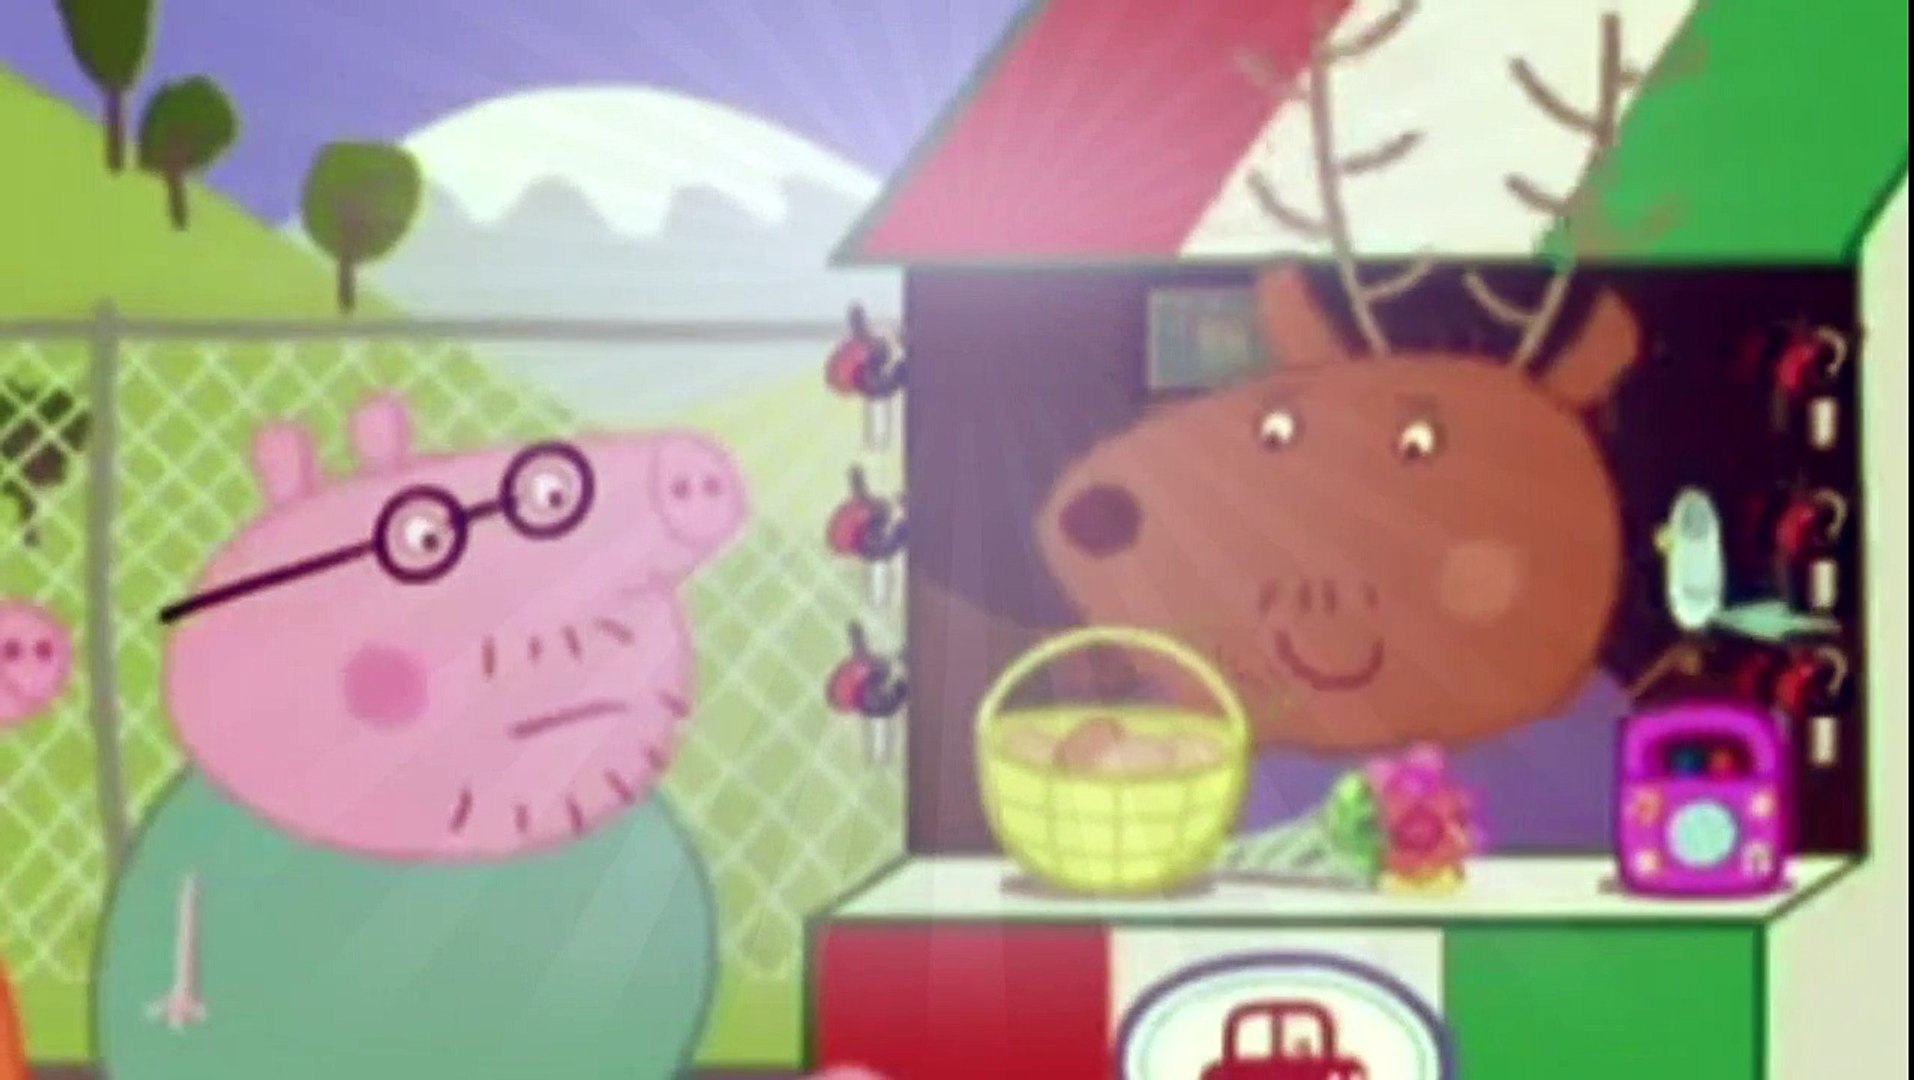 The Tiny Home For Holiday 🏡  Peppa Pig Official Full Episodes 